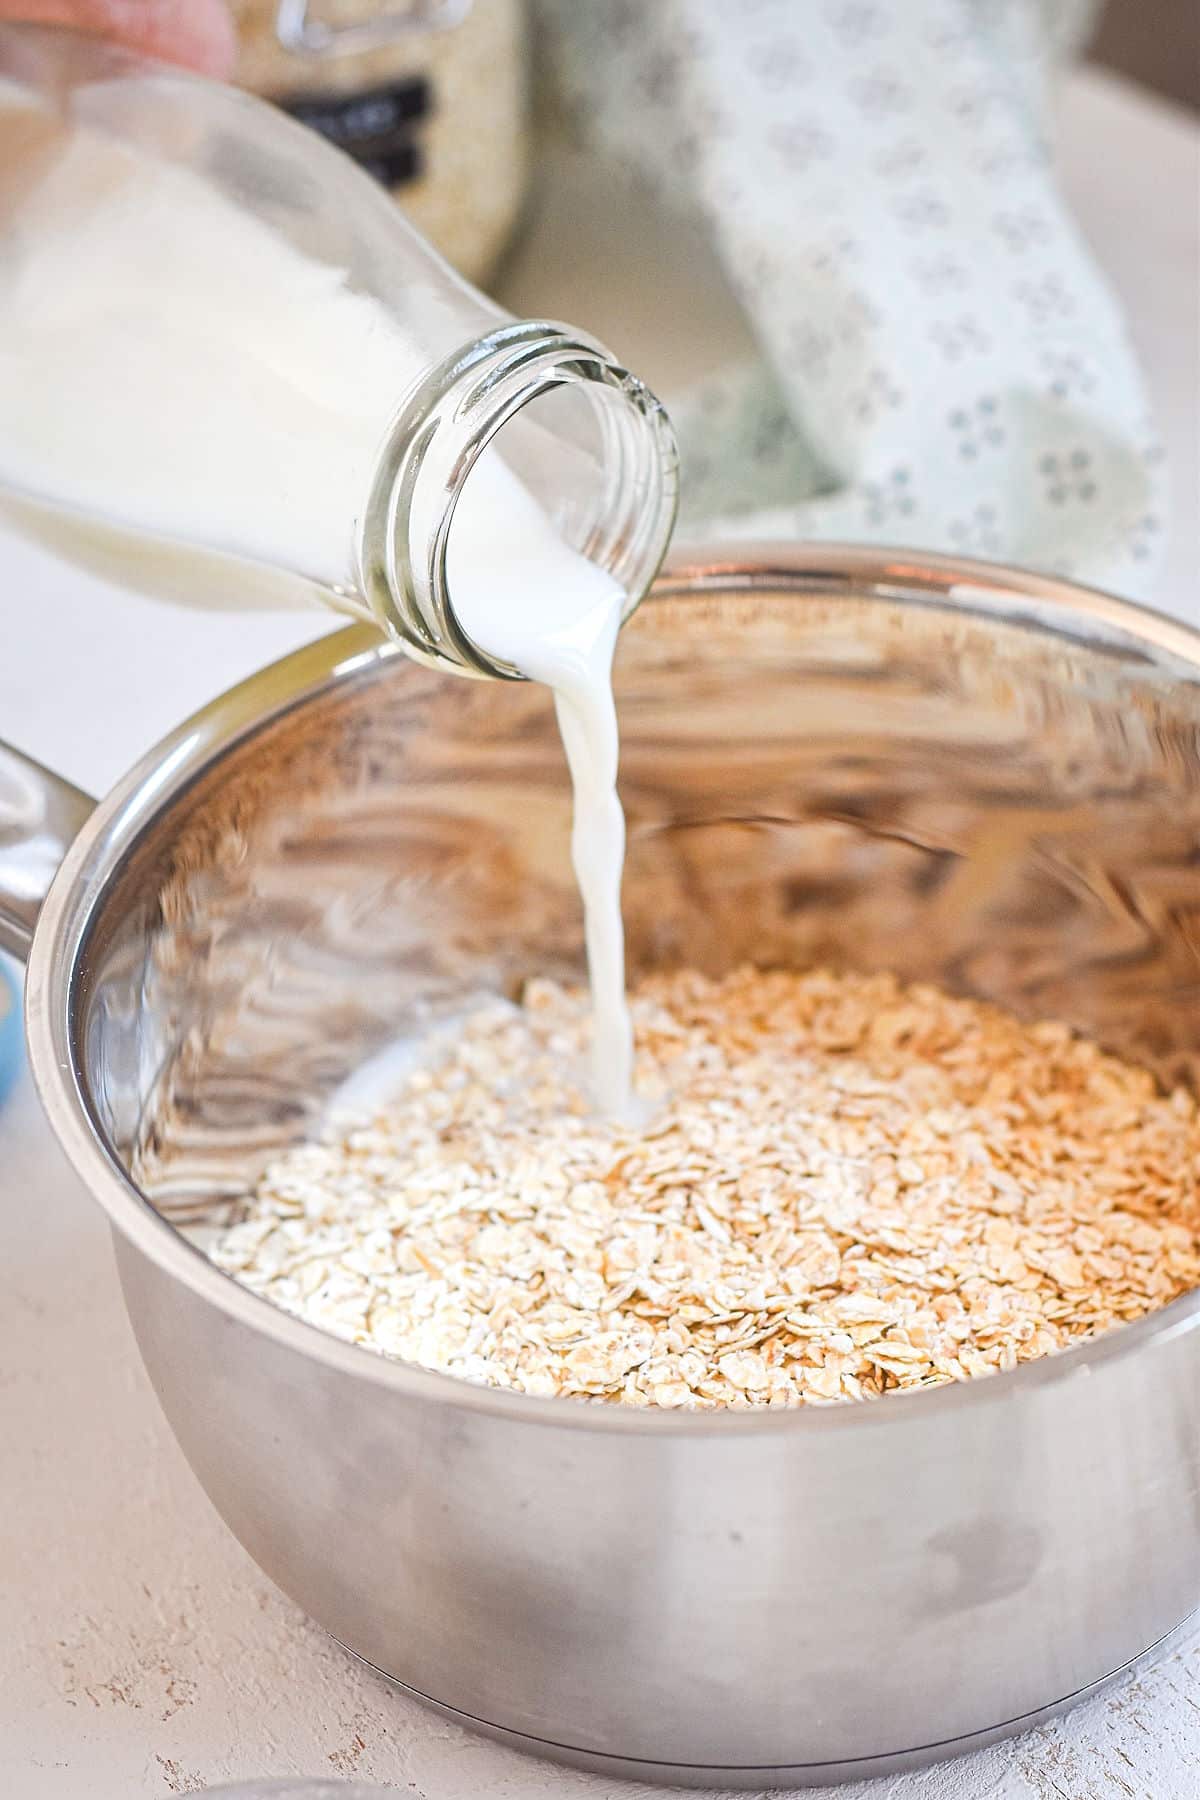 Milk pouring into saucepan with oatmeal.